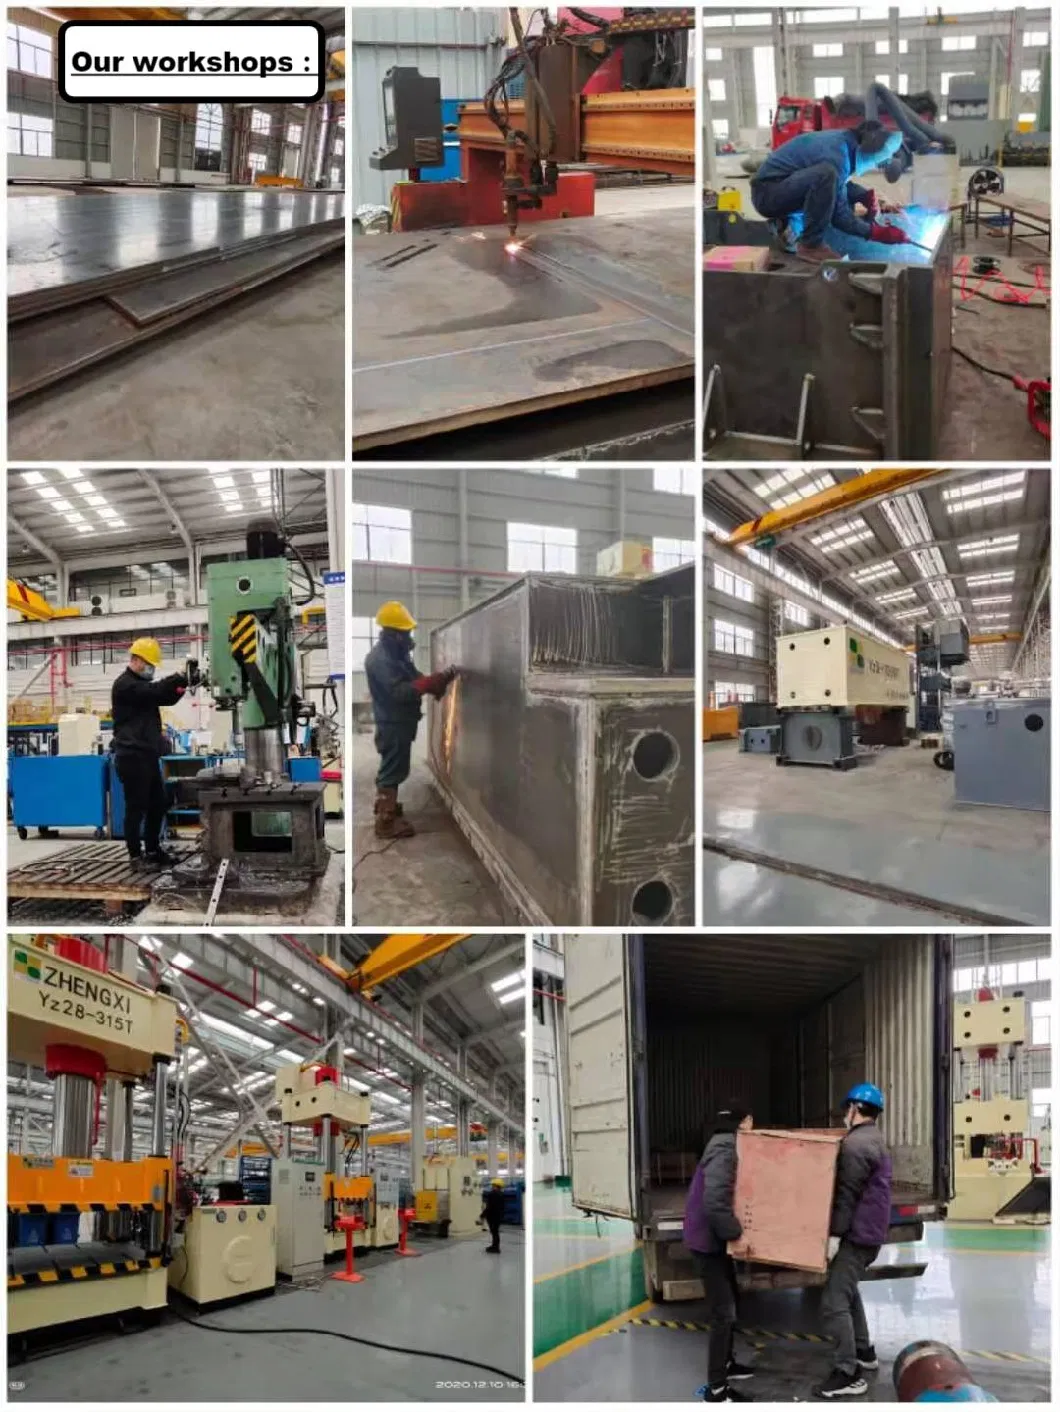 6000t Hydraulic Press Machine for 5-20mm Thick Plate Bending Stretching Stamping